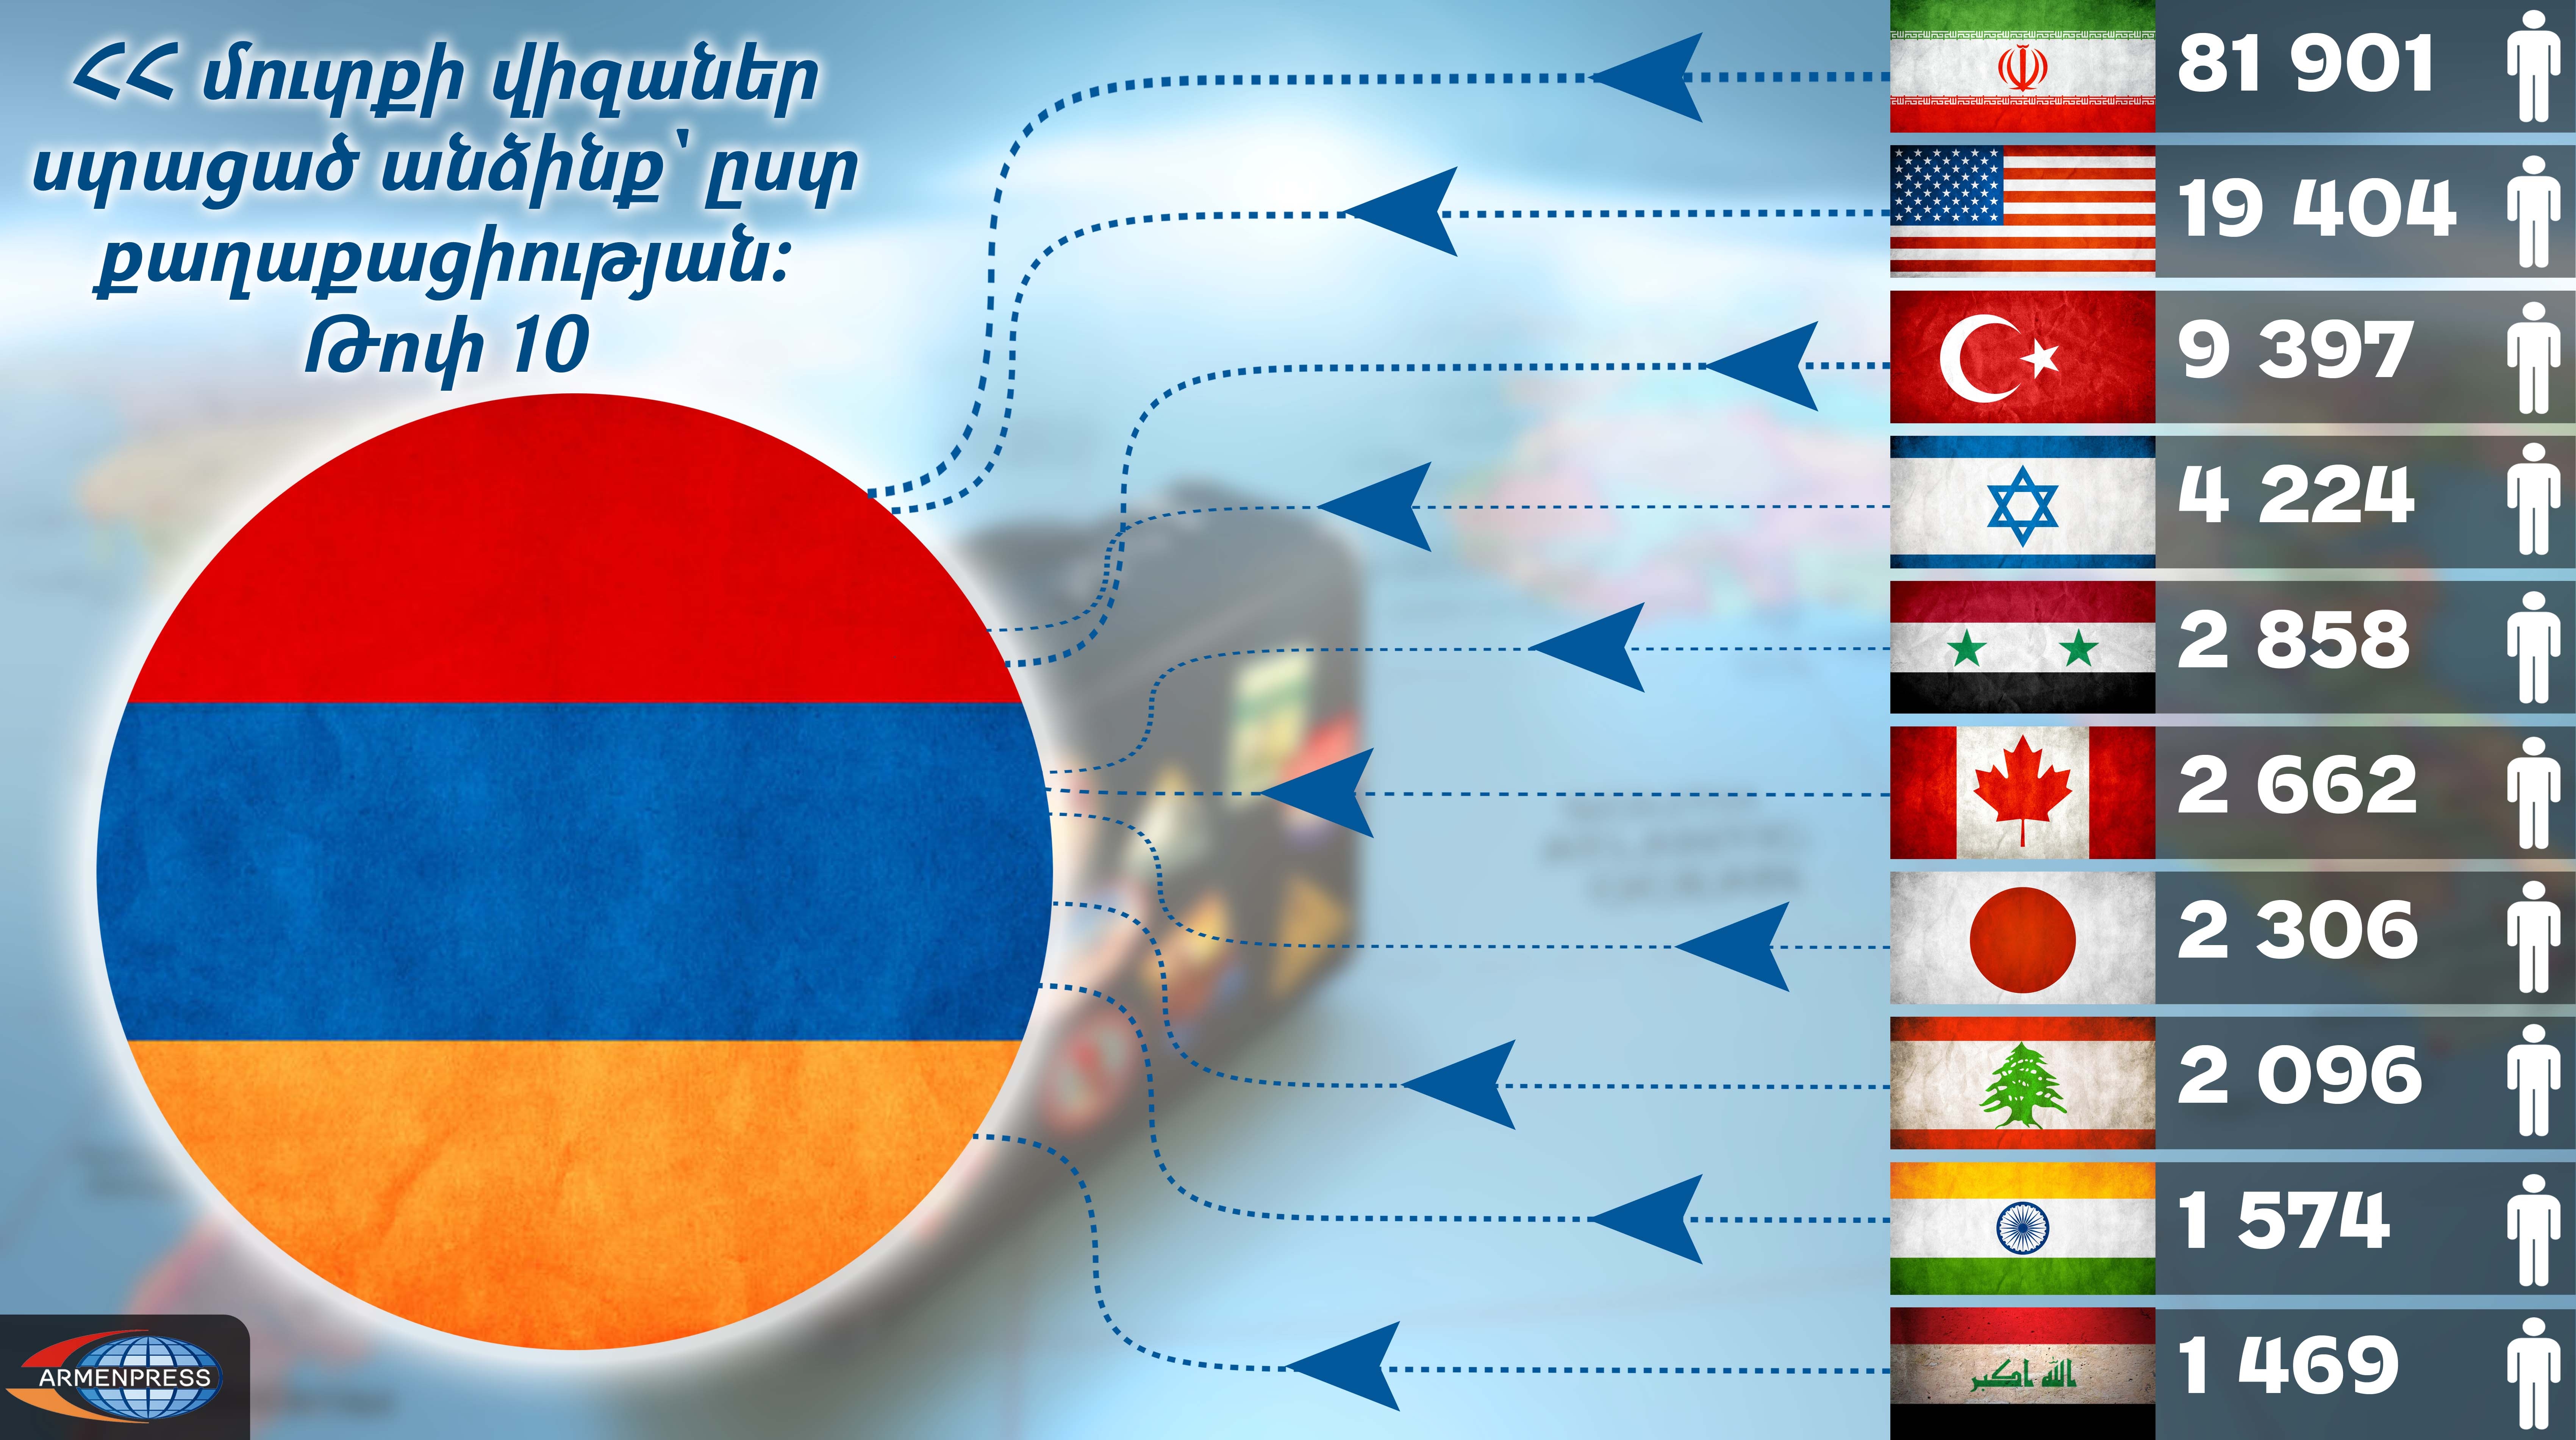 Foreigners visiting Armenia according to citizenship: Infographic